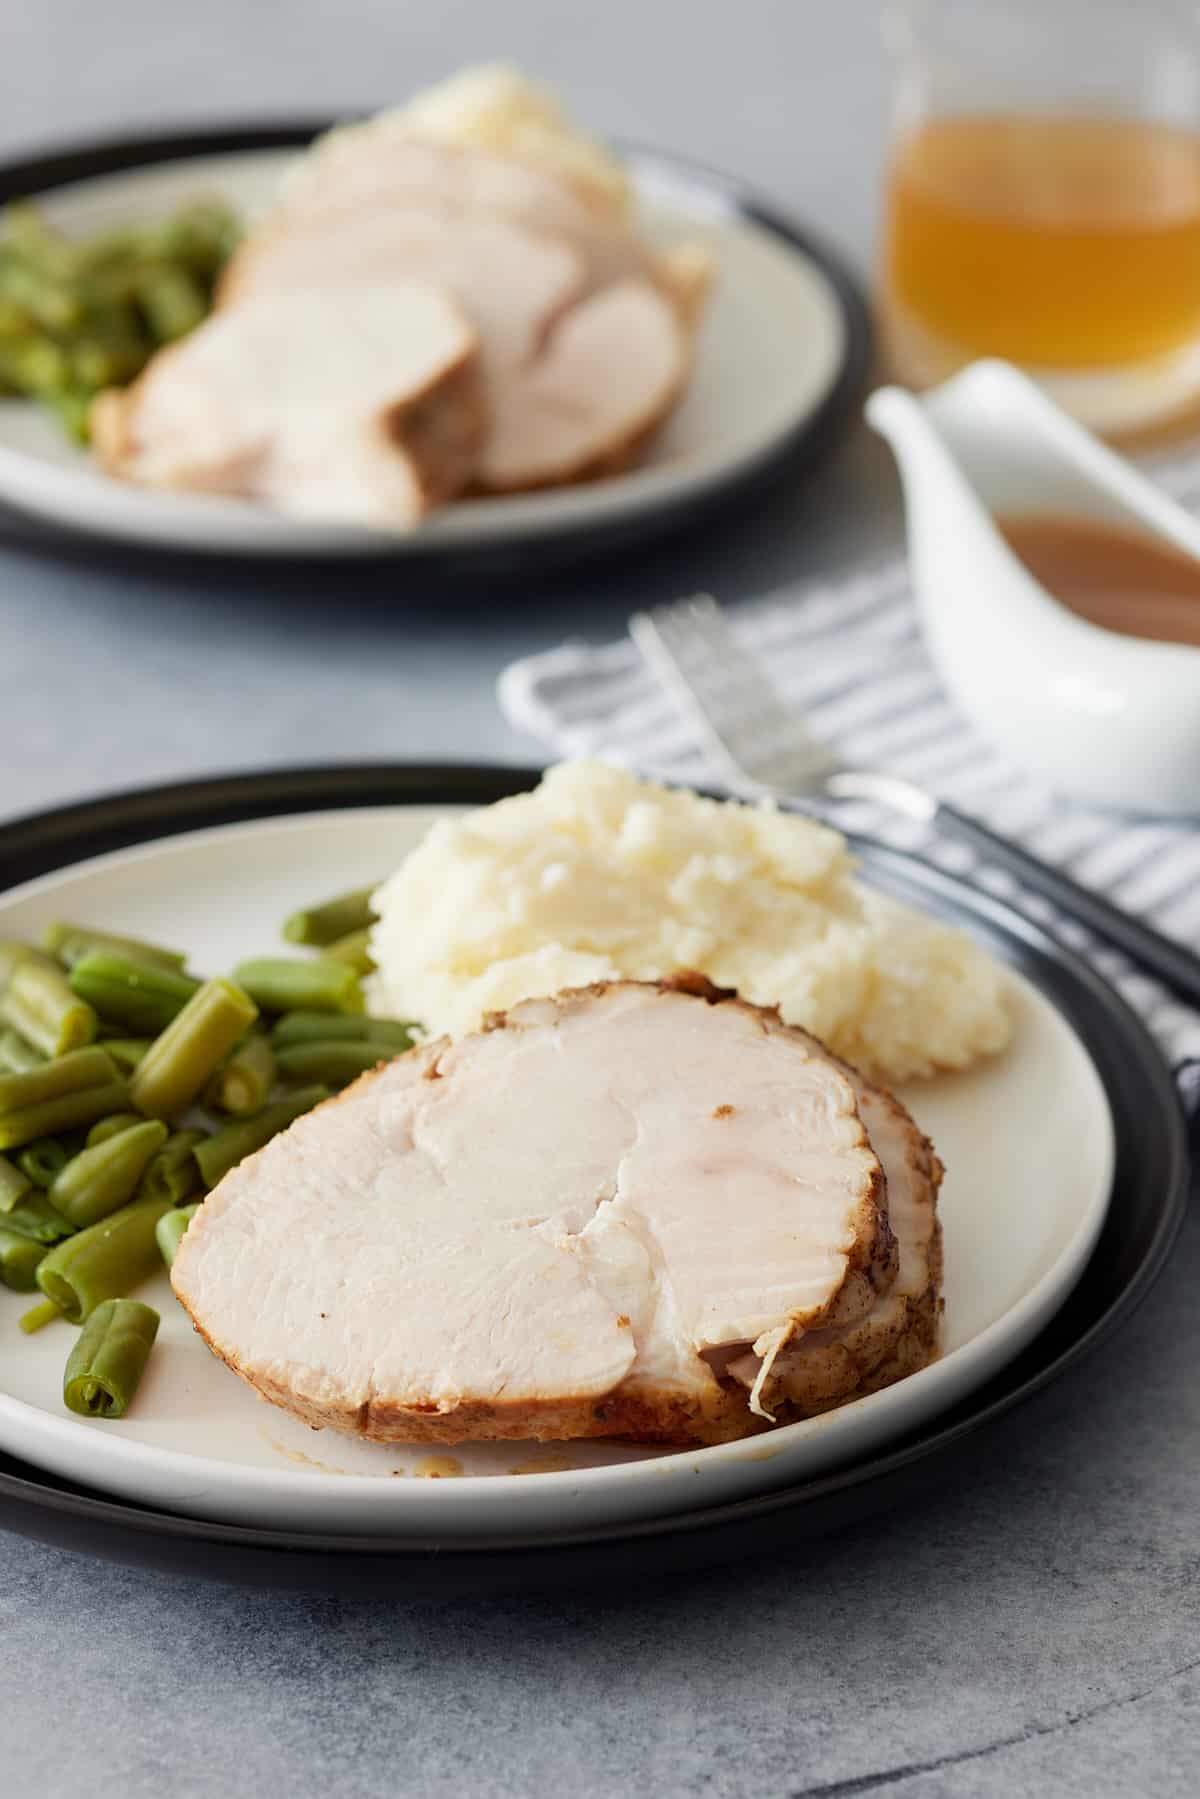 Table set with two servings of turkey breast, mashed potato and green beans set on white plates with a gravy jug set alongside